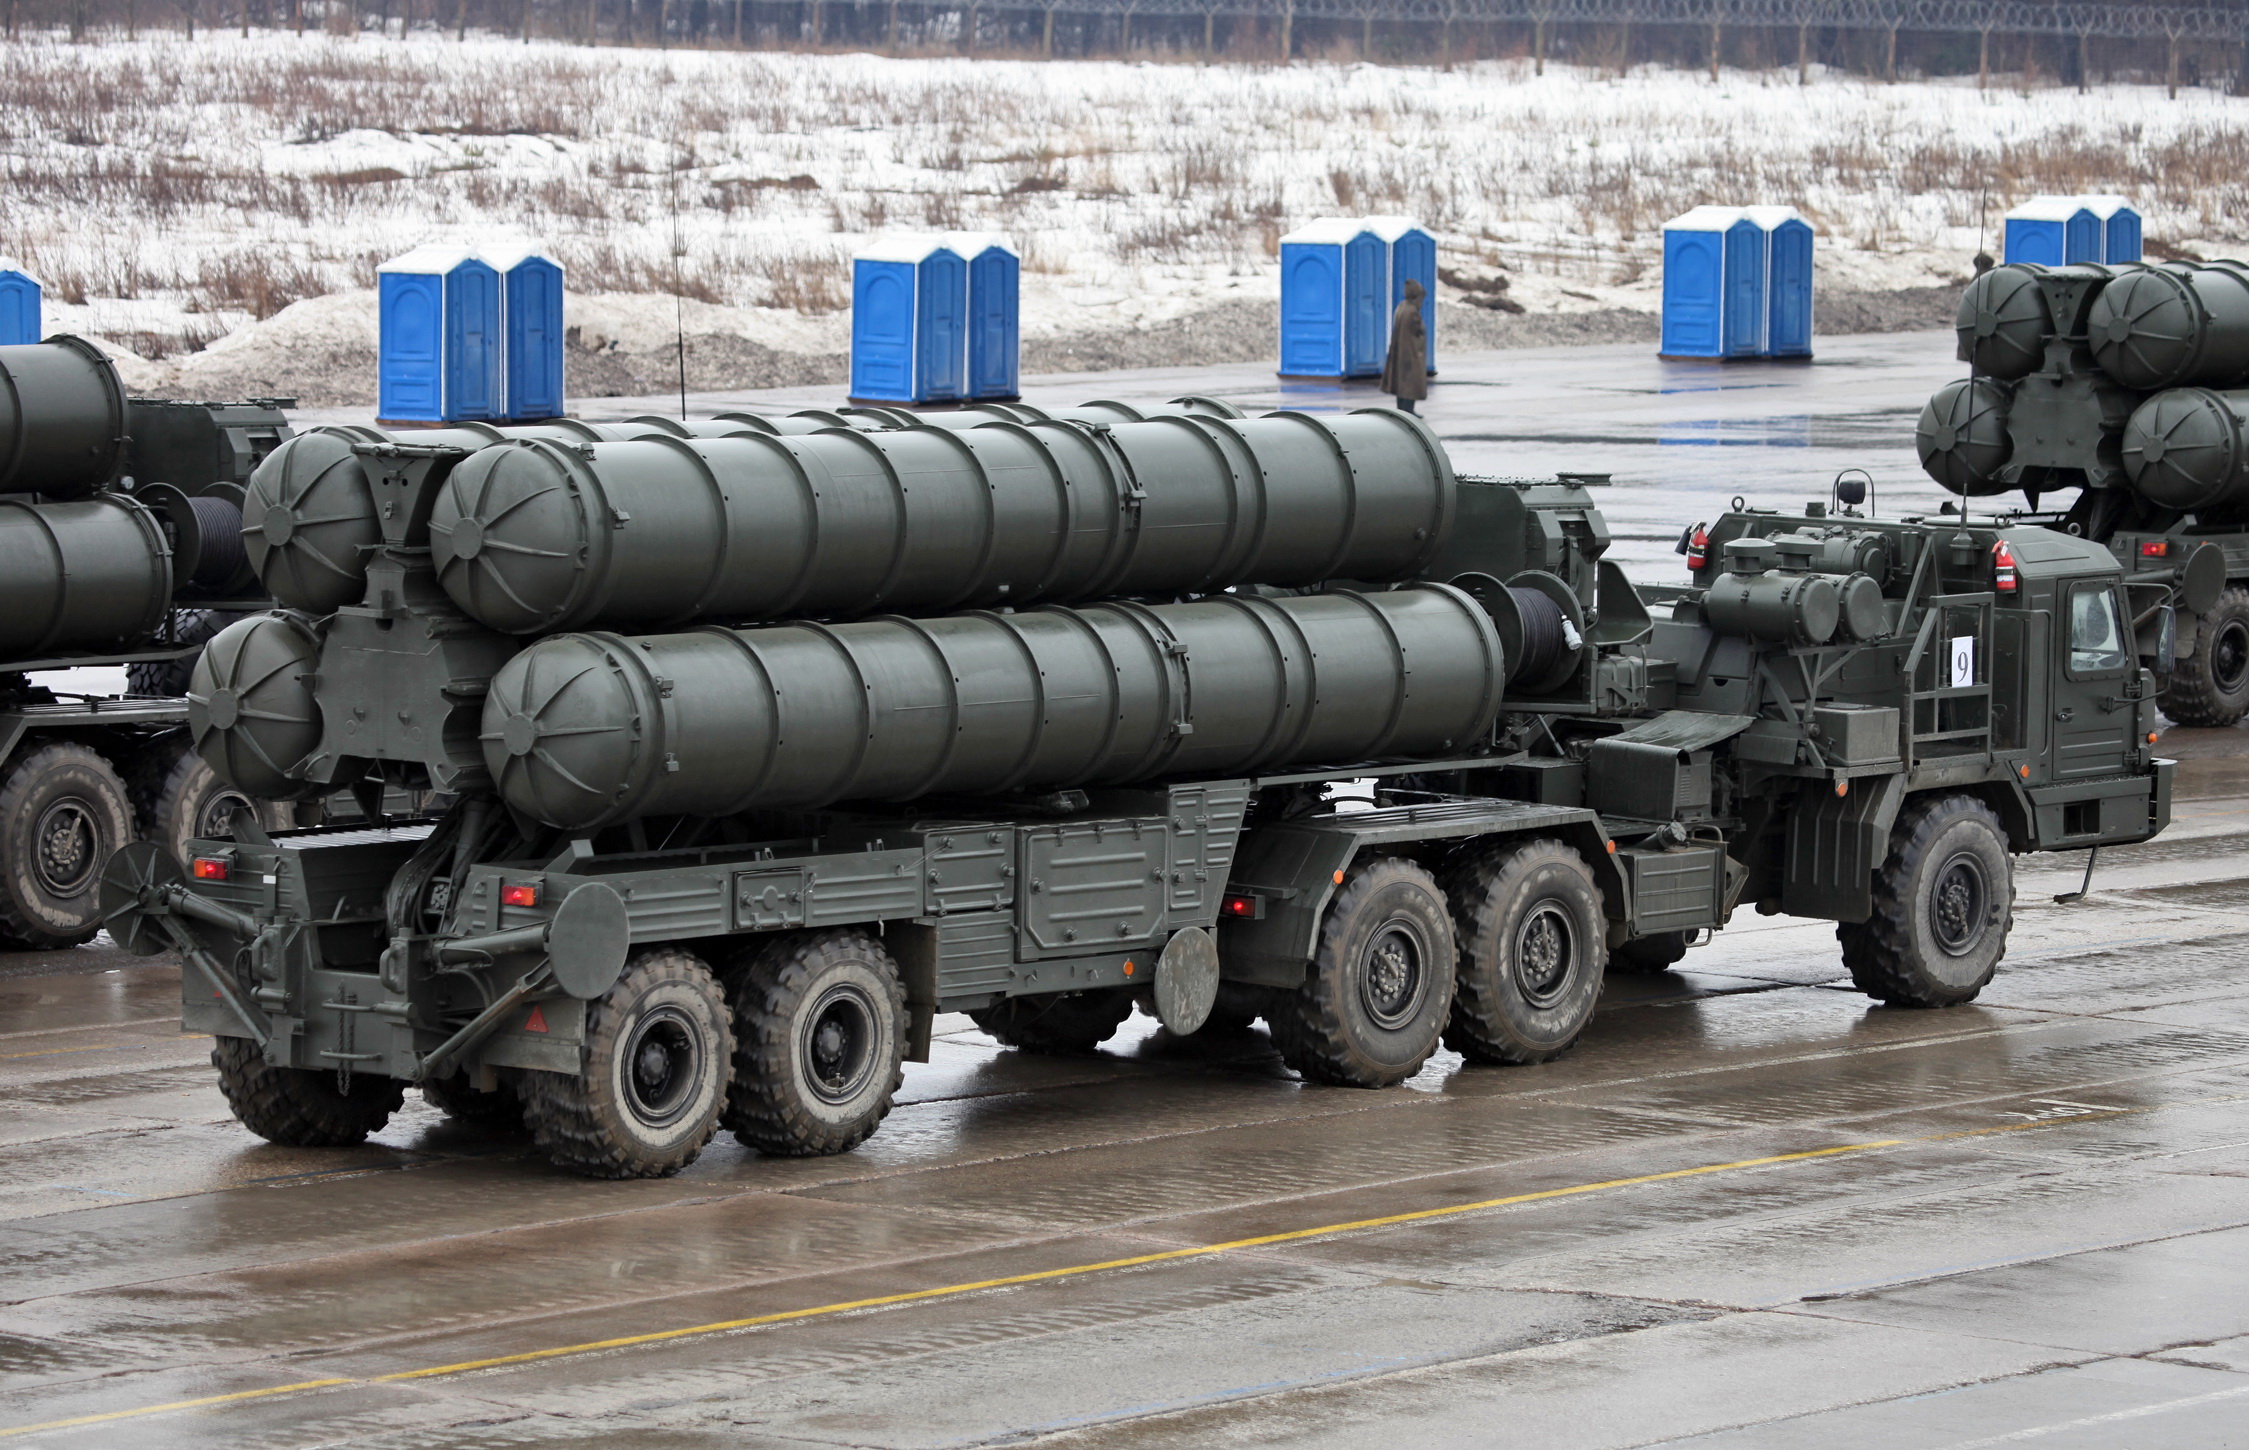 No final decision on purchasing S-400 missile defense system from Russia: Qatar 